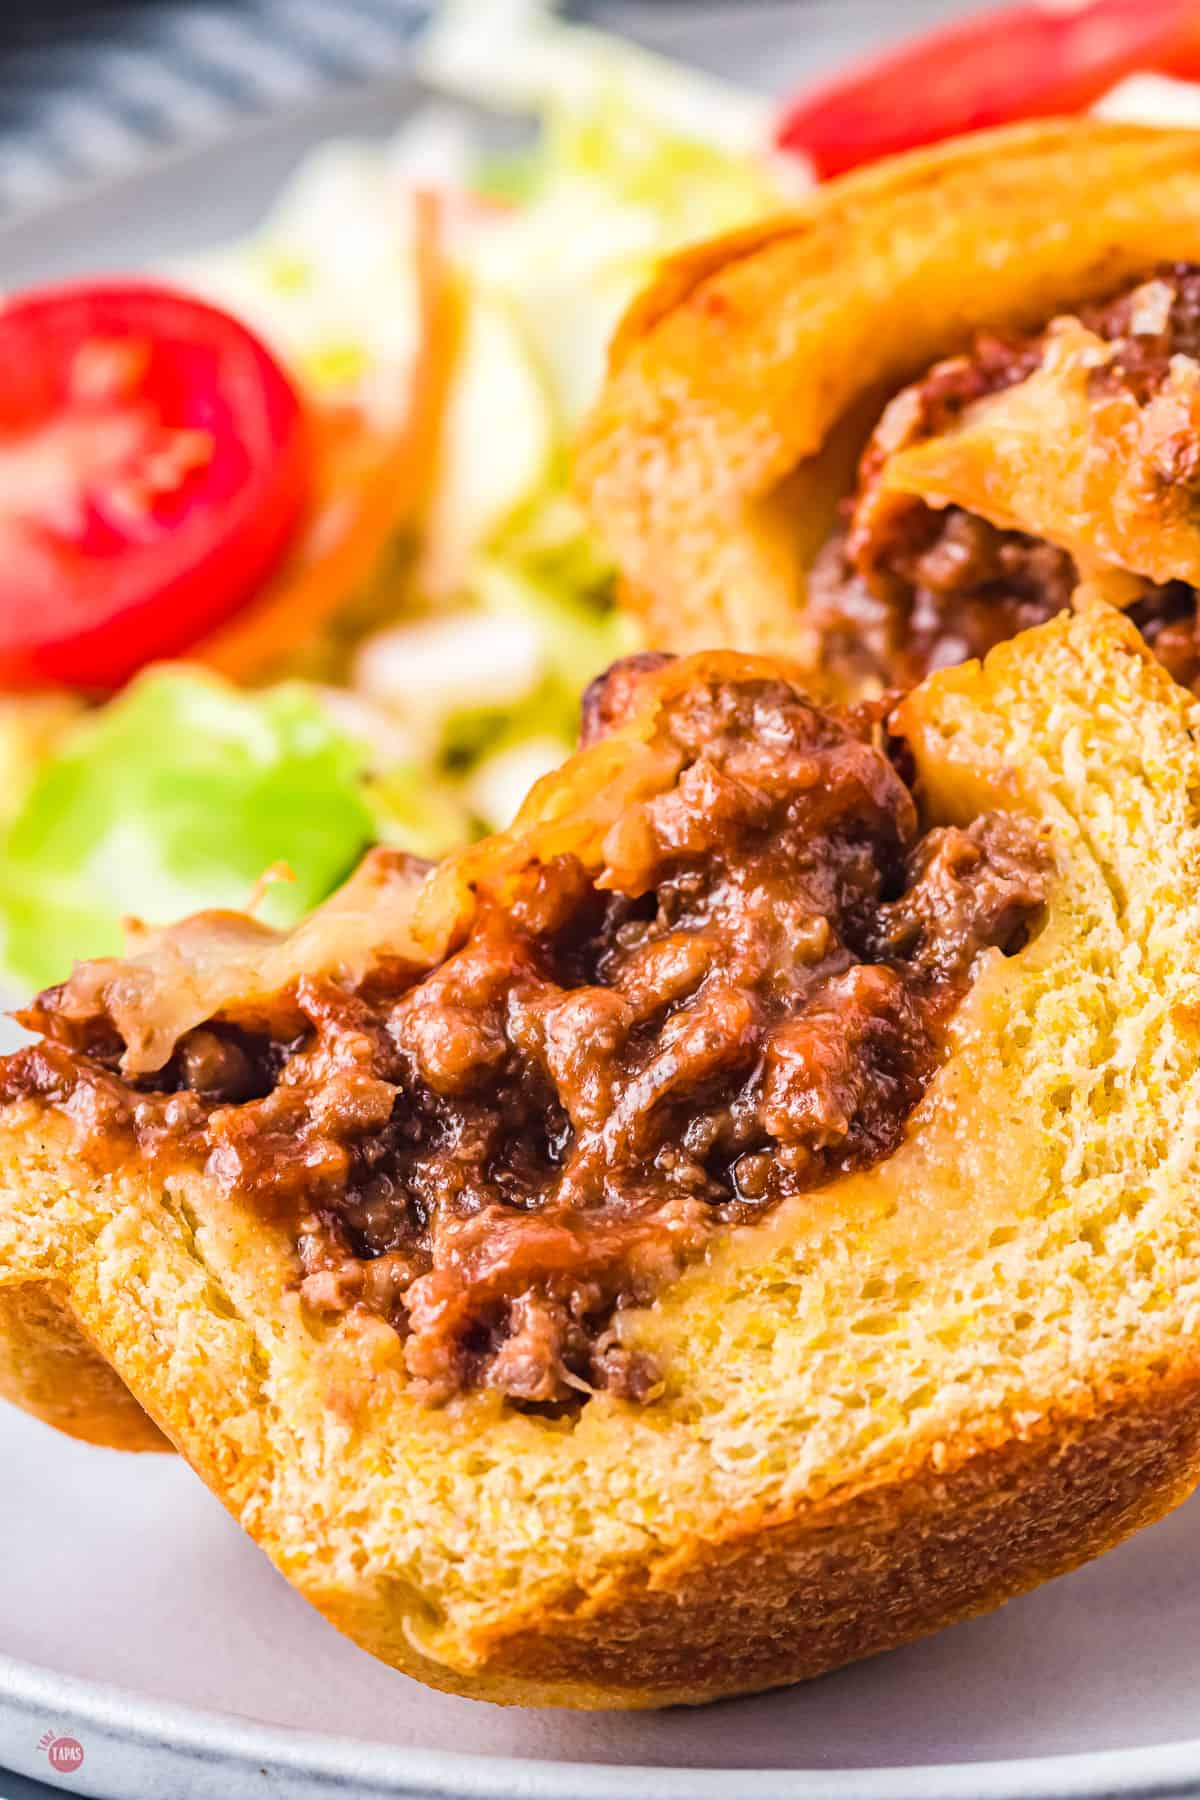 Close up of a sloppy joe cup on a plate with salad.